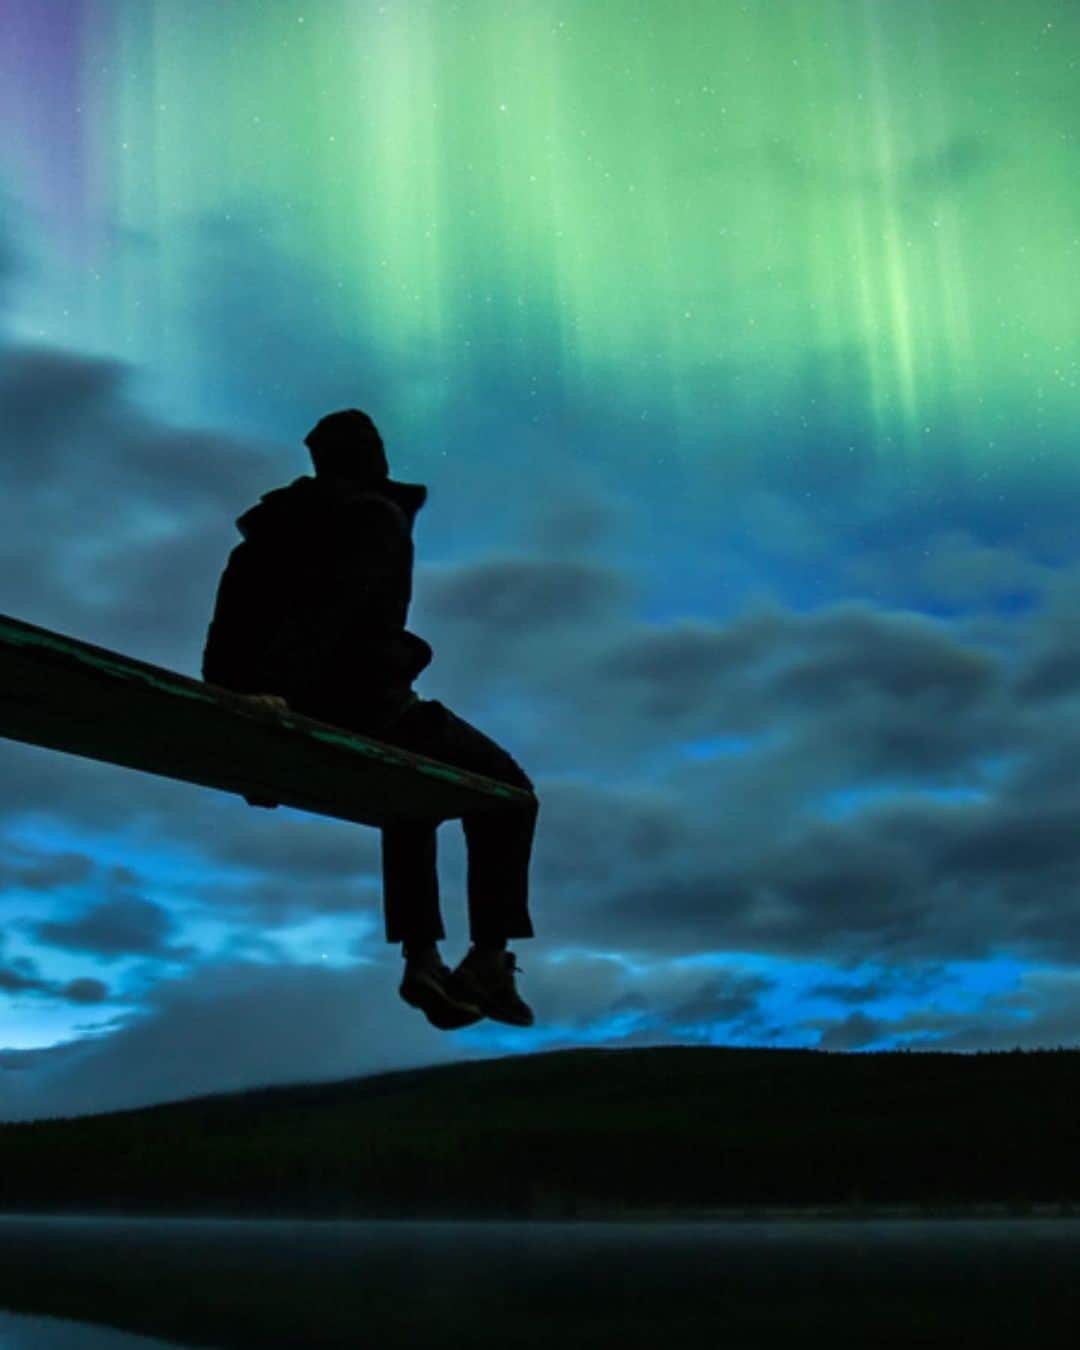 Explore Canadaさんのインスタグラム写真 - (Explore CanadaInstagram)「You spoke and we listened! Inspired by what you wanted to learn more about, this week's #CanadaSpotlight touches on one of Canada’s most famous natural wonders, the Northern Lights.⁠⠀ ⁠⠀ Mesmerizing and utterly surreal Canada’s vibrant Northern Lights often hold a special place in the hearts of those who have had the chance to catch a glimpse of this natural phenomenon. While the Northern Lights can be seen almost anywhere in Canada and during all seasons, optimal viewing conditions are during the winter months. Here is a run down of Northern Lights watching in our three territories:⁠⠀ ⁠⠀ - The Northwest Territories⁠⠀ ⁠⠀ One of the best places in Canada to see the Northern Lights, the Northwest Territories offers unparalleled viewing possibilities. It’s here that you have an exceptionally high potential of seeing the lights as they are generally visible 240 nights a year. On top of this, the Northwest Territories offers top notch experiences, immersing you in pristine nature, and Indigenous culture and heritage. ⁠⠀ ⁠⠀ - Yukon⁠⠀ ⁠⠀ An adventure-seekers paradise, the Yukon boasts dynamic landscapes that are teeming with iconic Canadian wildlife. Here, there are some amazing ways to see the Northern Lights with minimal light pollution, while offering up some very cozy rustic cabins or prospector-style tents to bundle up in after your adventure. ⁠⠀ ⁠⠀ - Nunavut⁠⠀ ⁠⠀ Warm-hearted locals and terrific Northern Lights viewing conditions await you in Canada’s most northern territory, Nunavut. What makes Nunavut an amazing place to see the aurora is its high northern latitude that provides as much as 20 hours of darkness in December.⁠⠀ ⁠⠀ #ExploreCanada #CanadaNice⁠⠀ ⁠⠀ *Know before you go! Check the most up-to-date travel restrictions and border closures before planning your trip and if you're travelling in Canada, download the COVID Alert app to your mobile device.*⁠⠀ ⁠⠀ 📷: ⁠⠀ @explorecanada⁠⠀ @michalgoga⁠⠀ @auroravillageca⁠⠀ @martinagebarovska @blachford_ll⁠⠀ @austin.mackay⁠⠀ @travelalberta⁠⠀ ⁠⠀ 📍: ⁠⠀ @travelyukon⁠⠀ @destinationnunavut⁠⠀ @spectacularnwt⁠⠀ @spectacularnwt⁠⠀ @travelmanitoba⁠⠀ @travelalberta⁠」1月9日 2時47分 - explorecanada